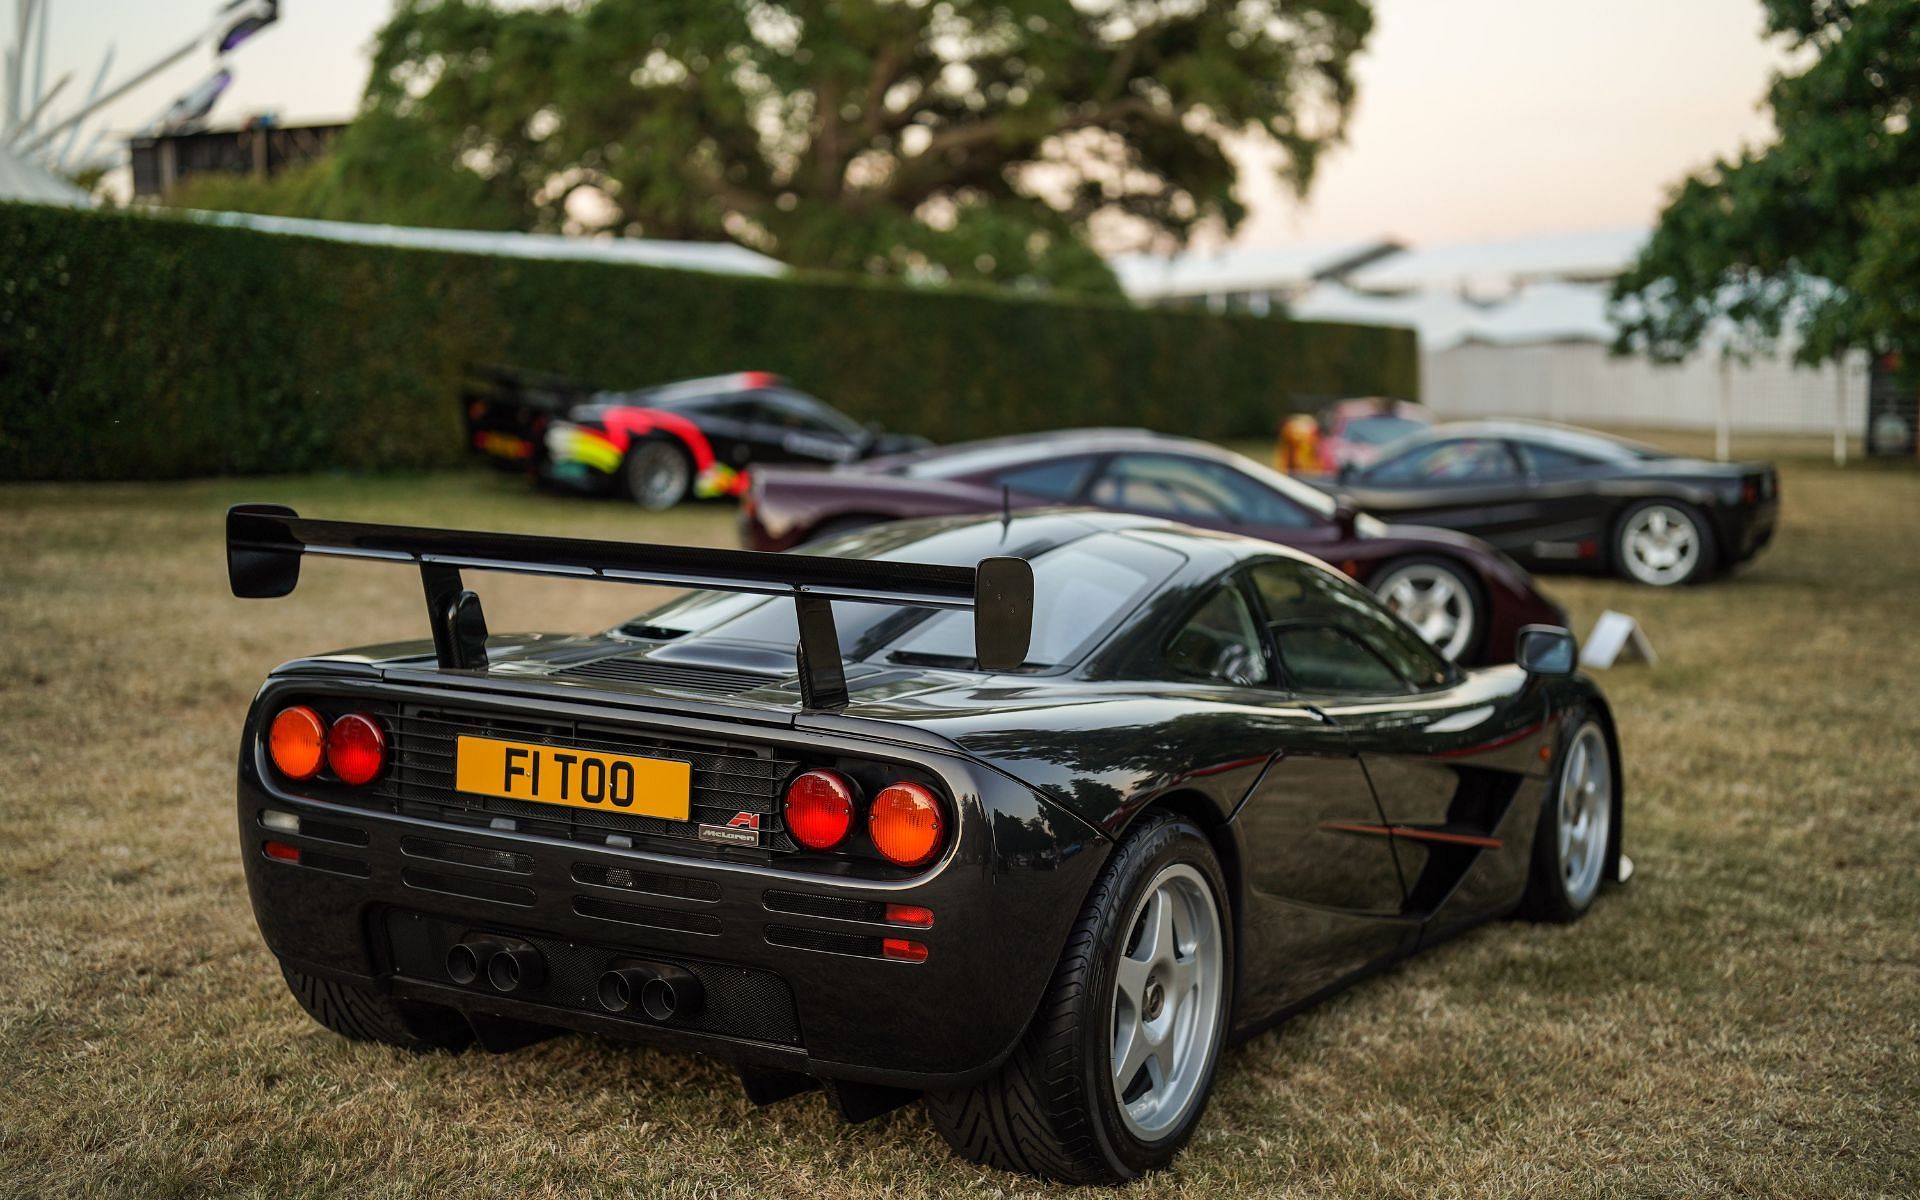 The McLaren F1 at the Good Wood Festival of Speed. Picture taken from @fosgoodwood on Twitter.